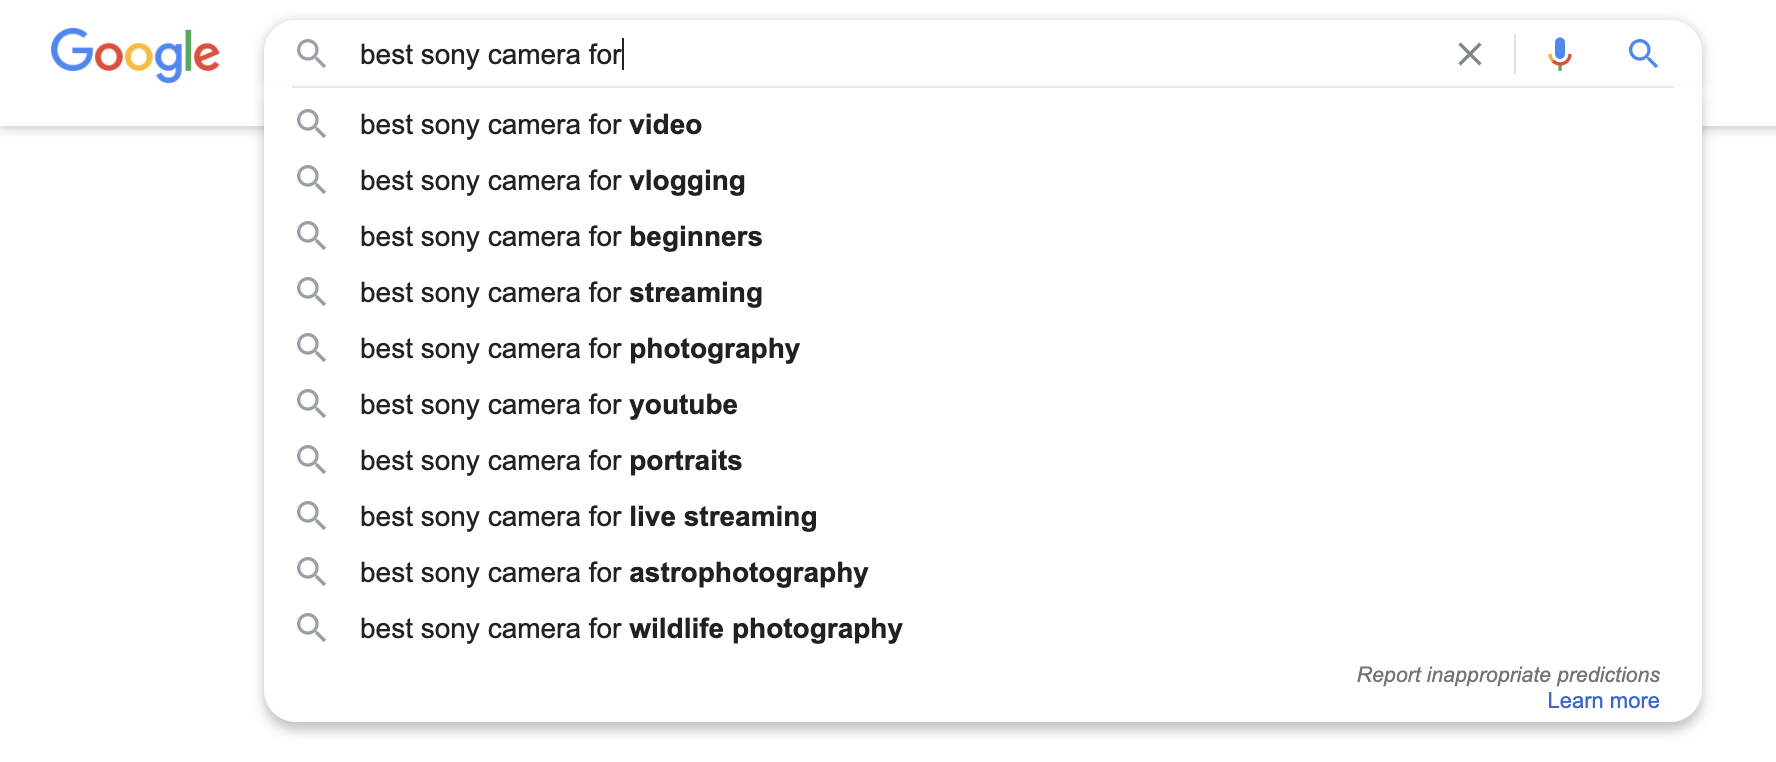 Find commercial intent keywords with Google Autocomplete